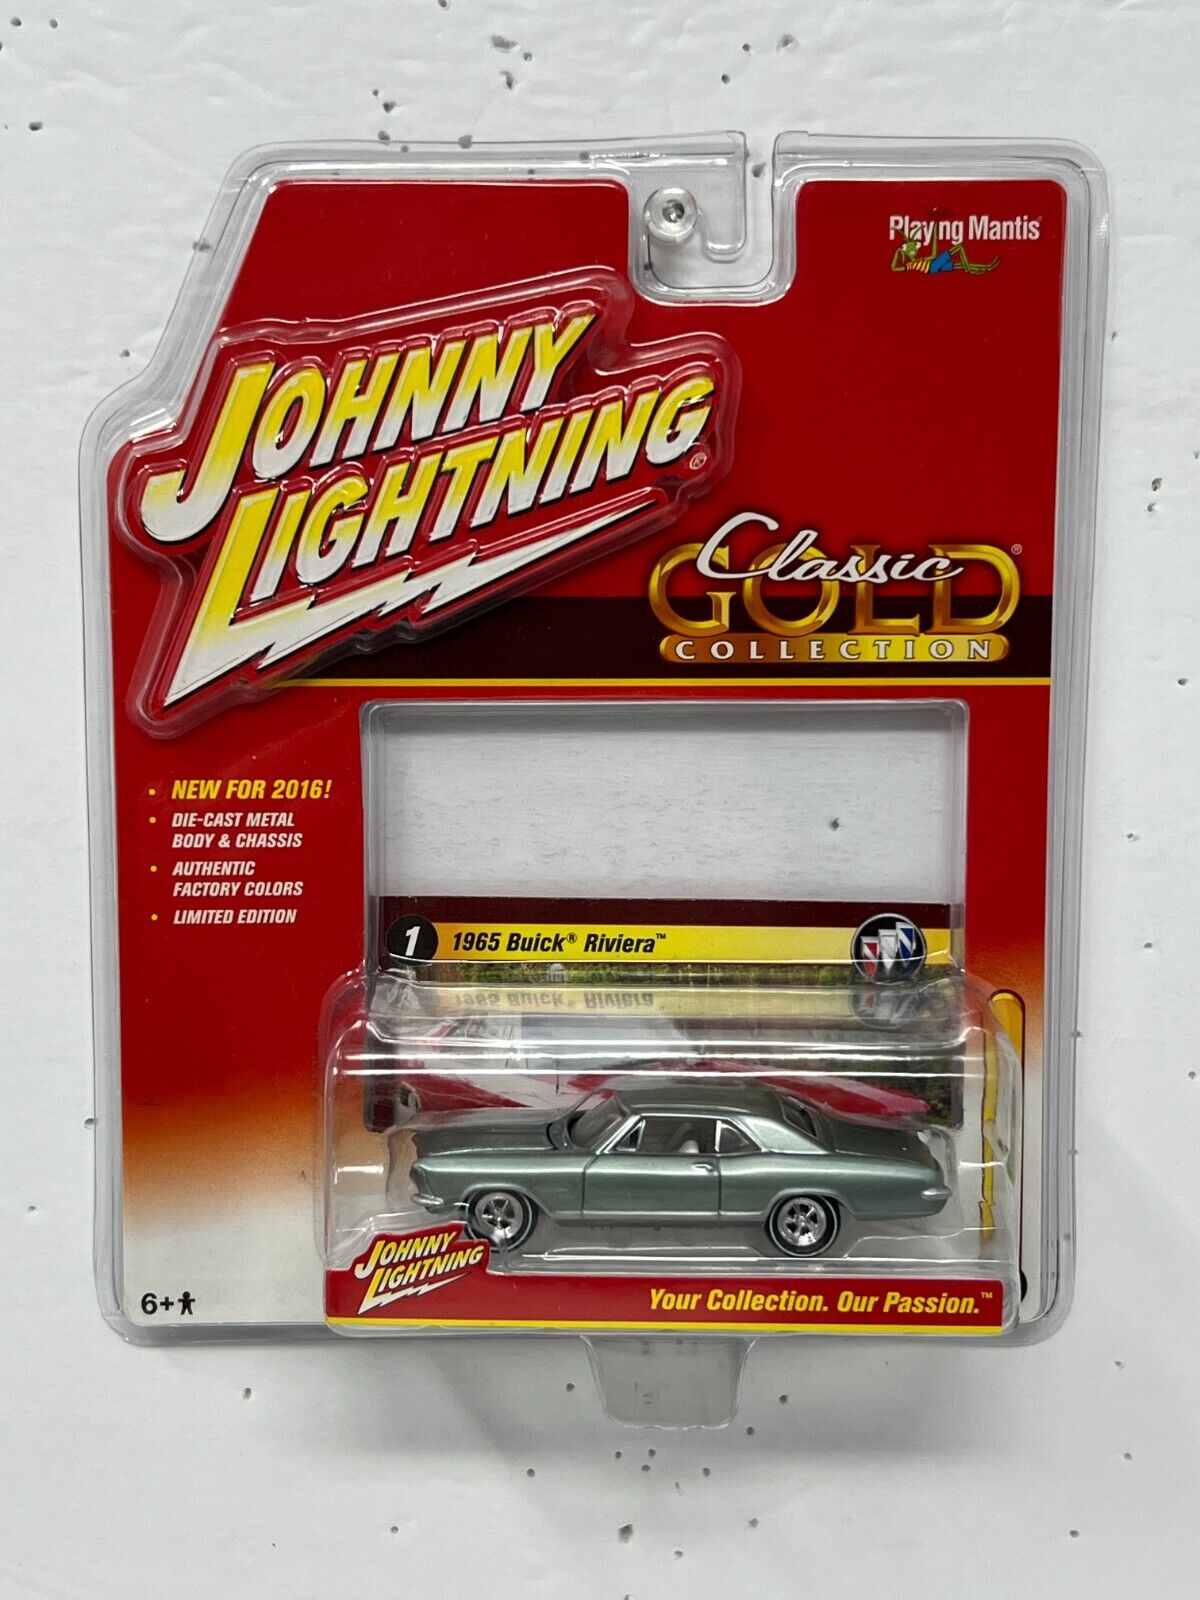 Johnny Lightning Classic Gold Collection 1965 Buick Riviera 1:64 Diecast